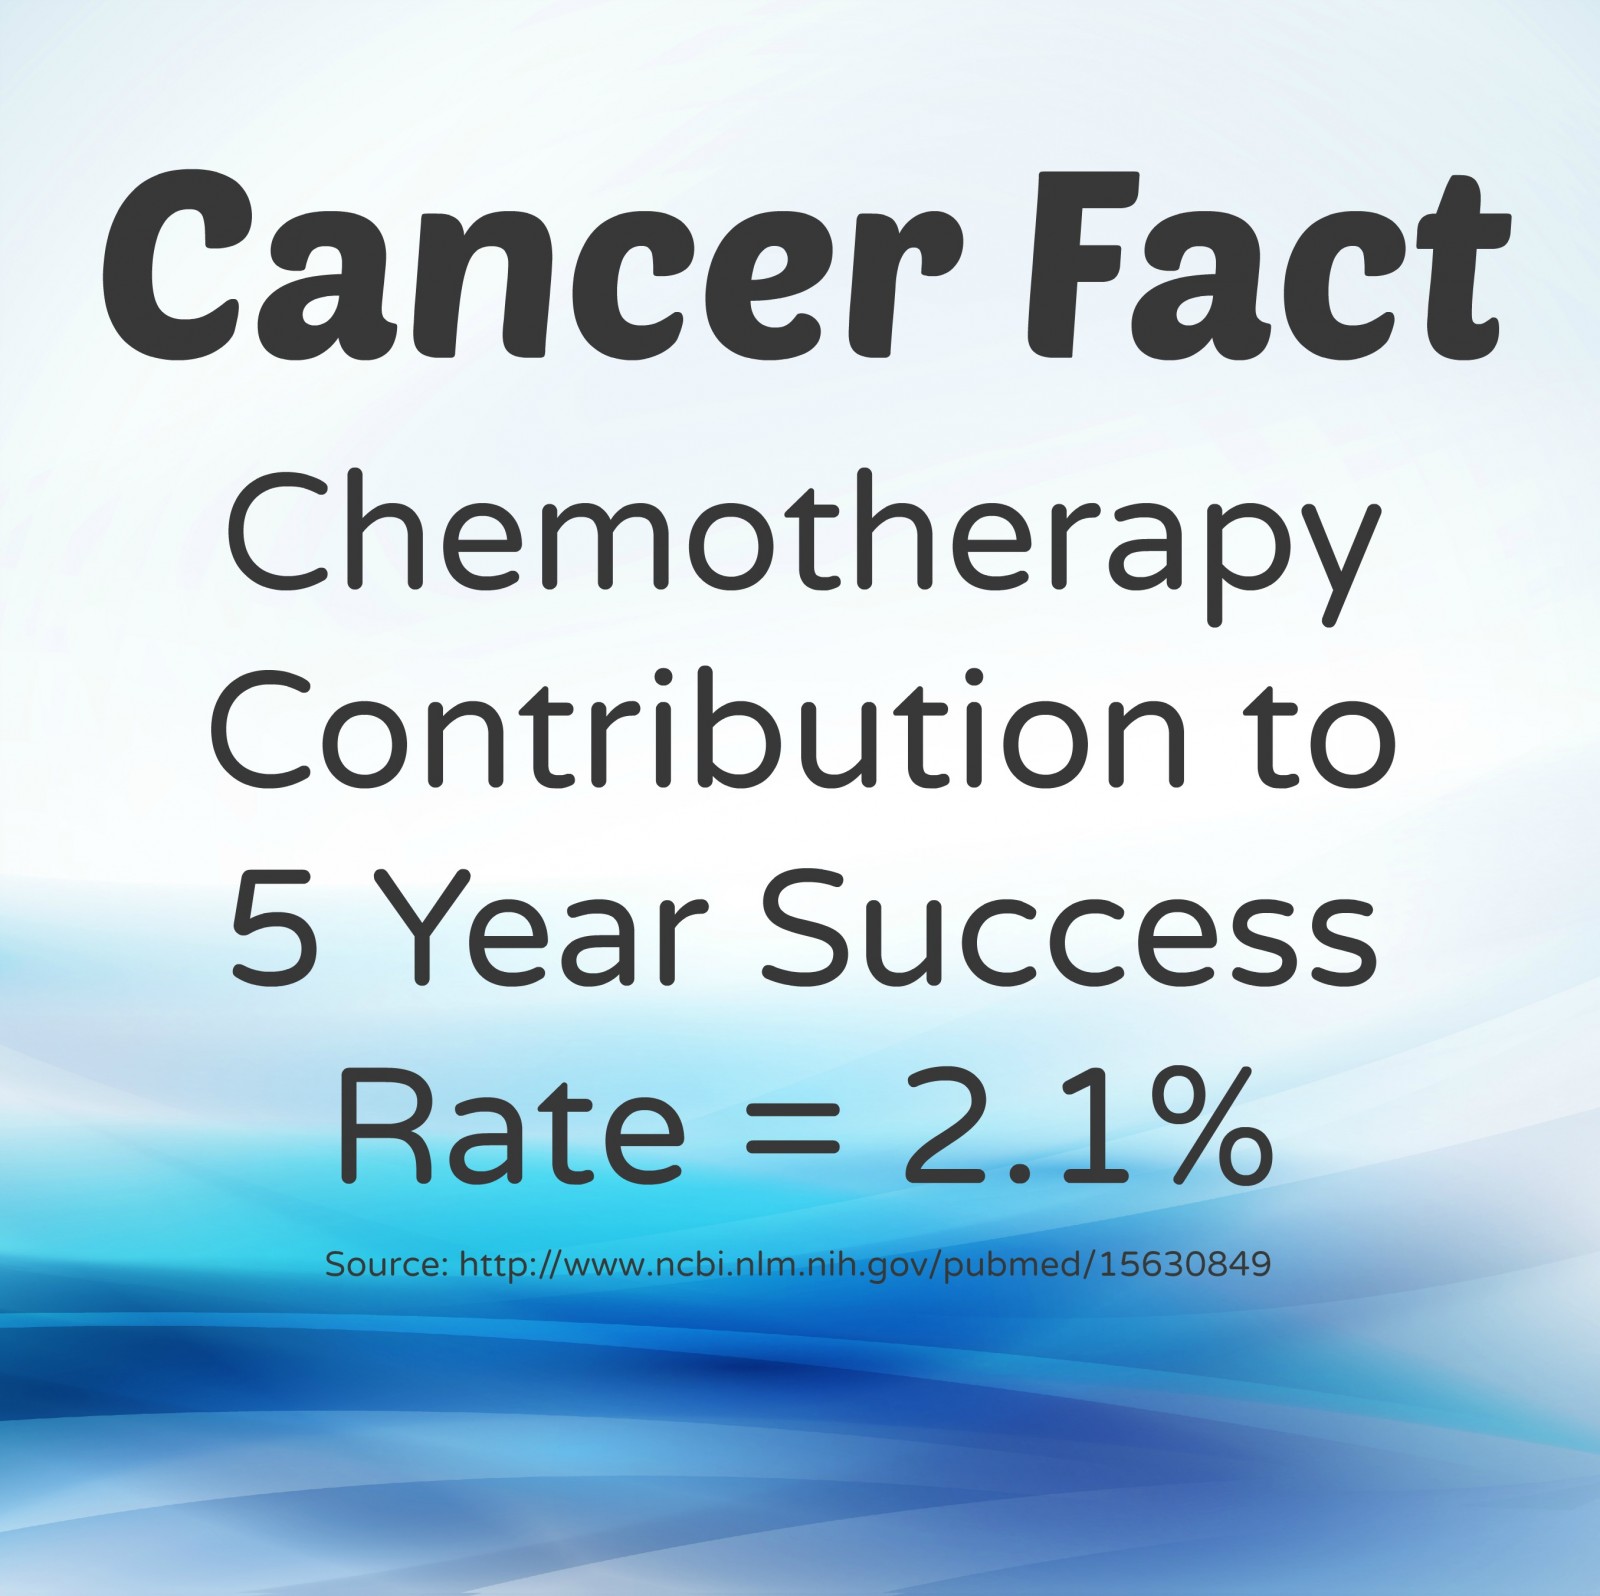 Cancer and Chemo - not such a good mix